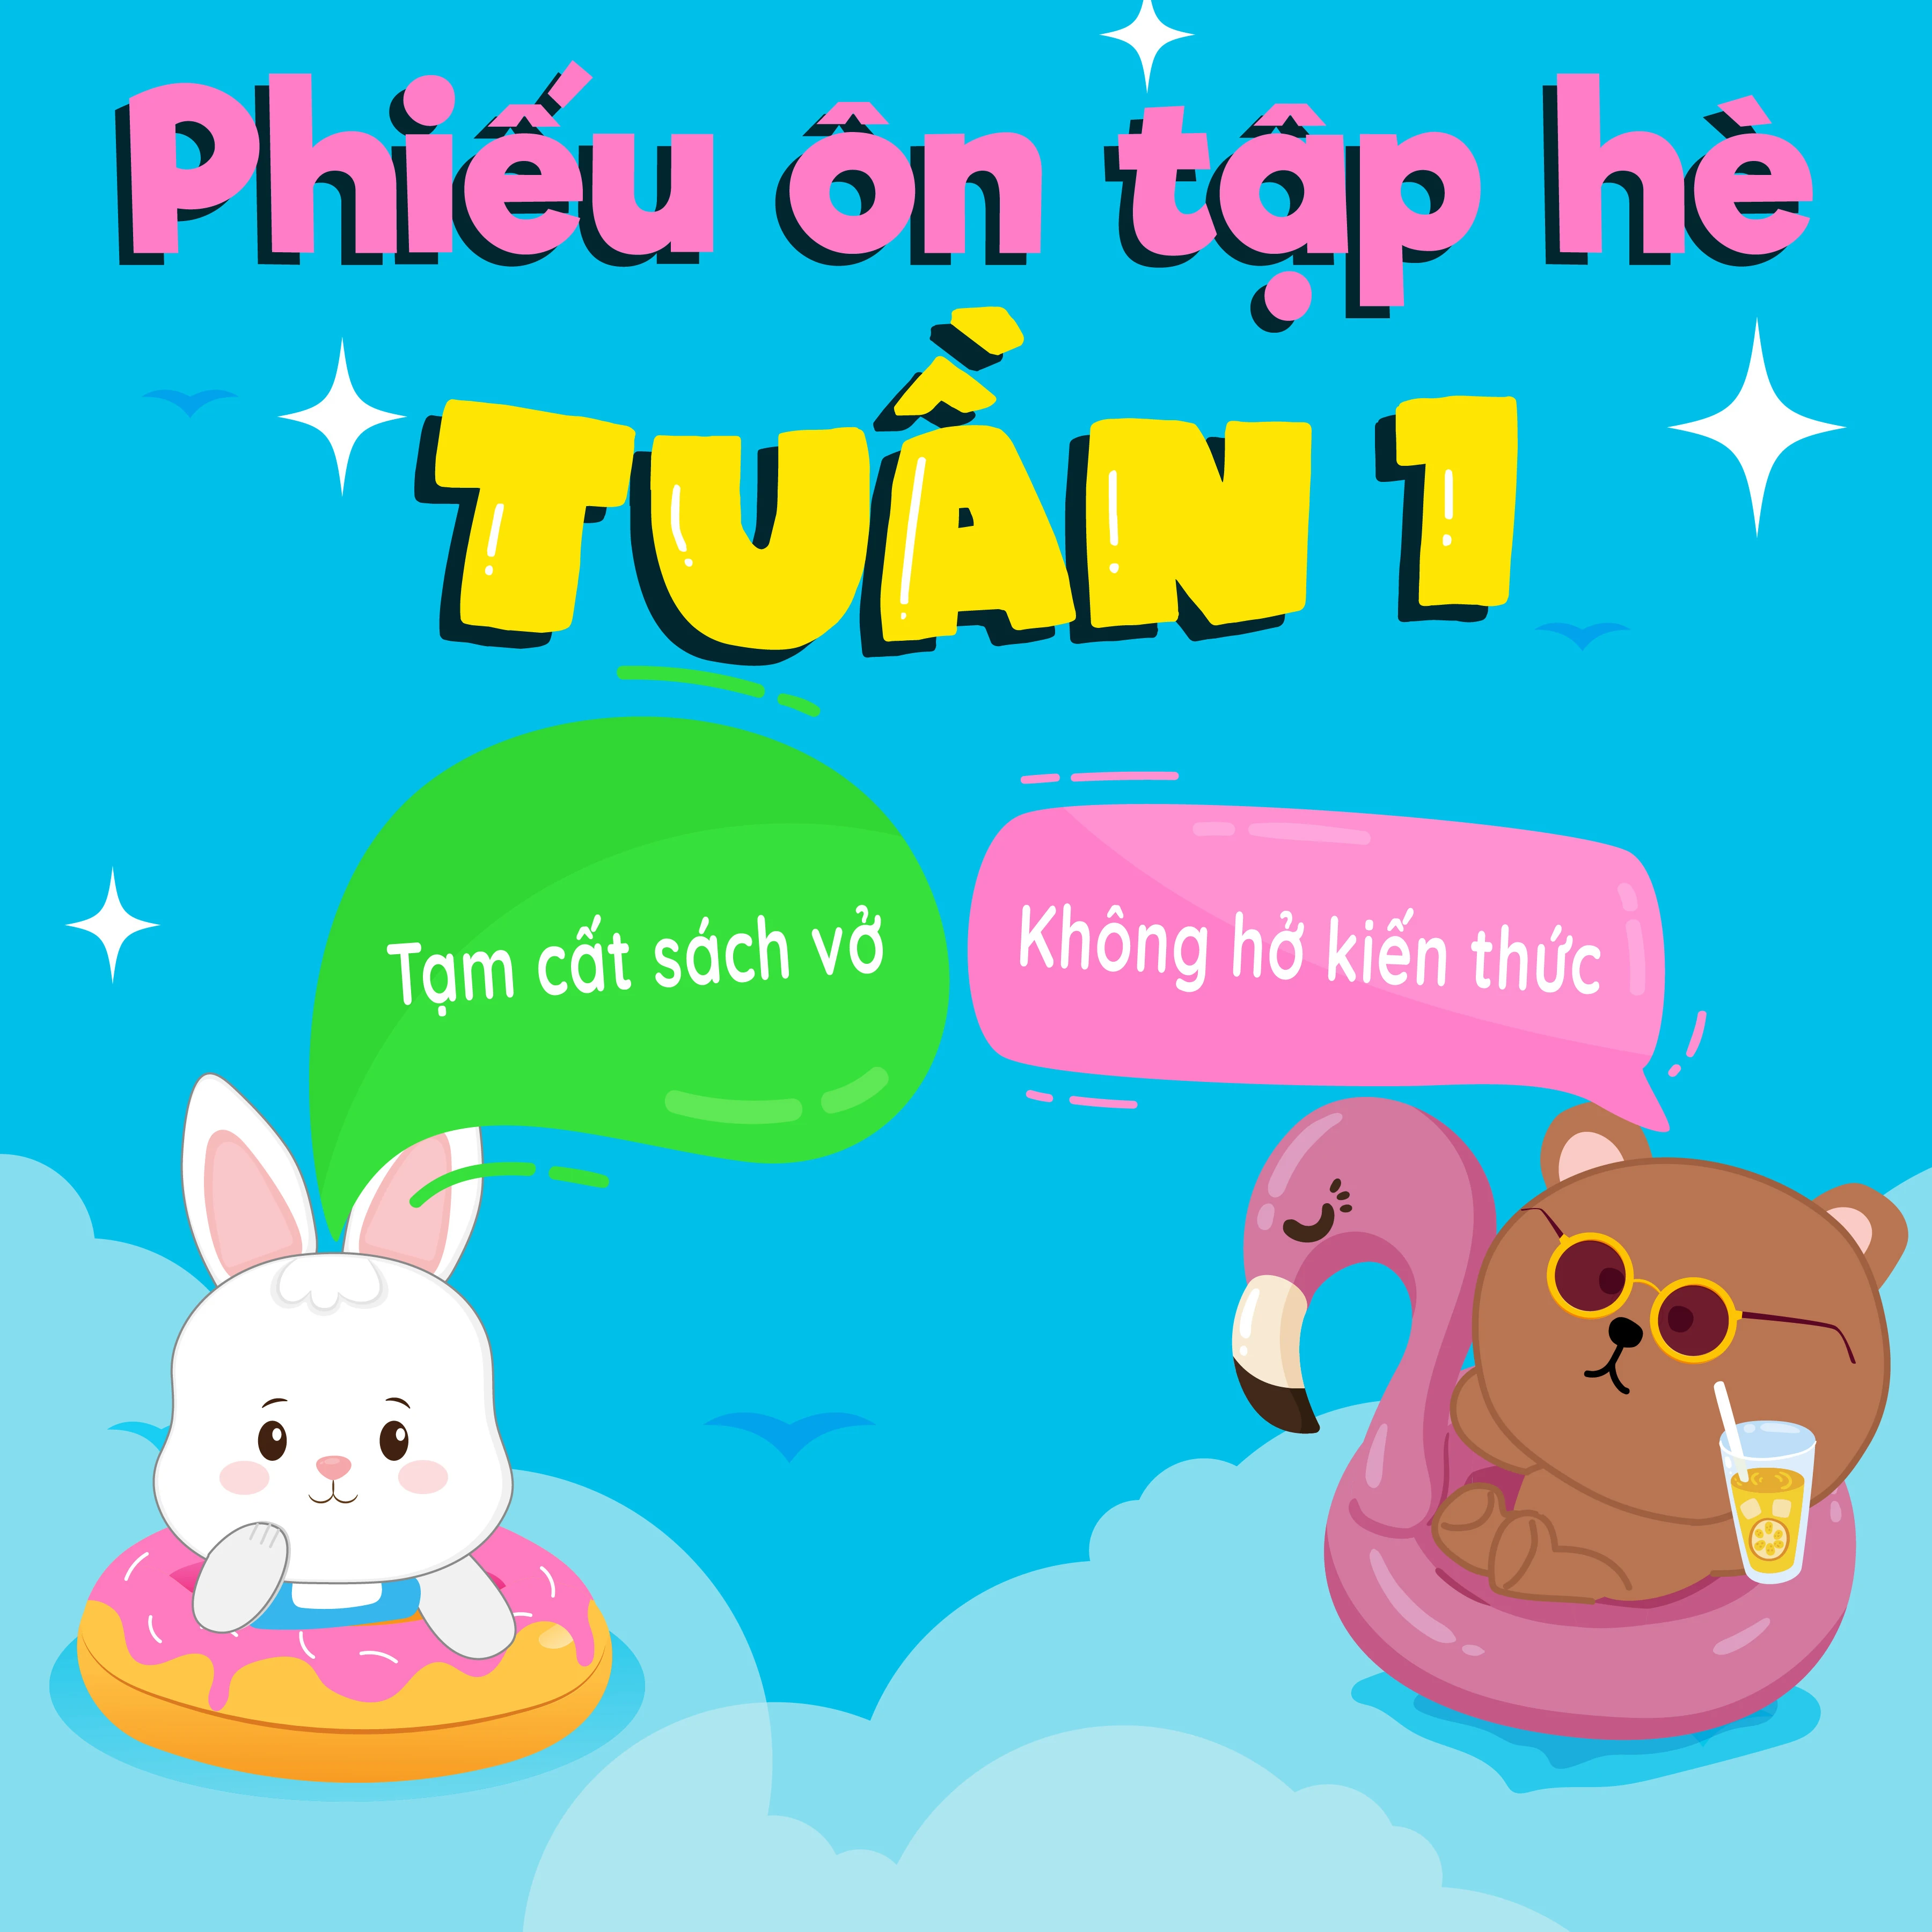 phieu-on-tap-he-toan-1